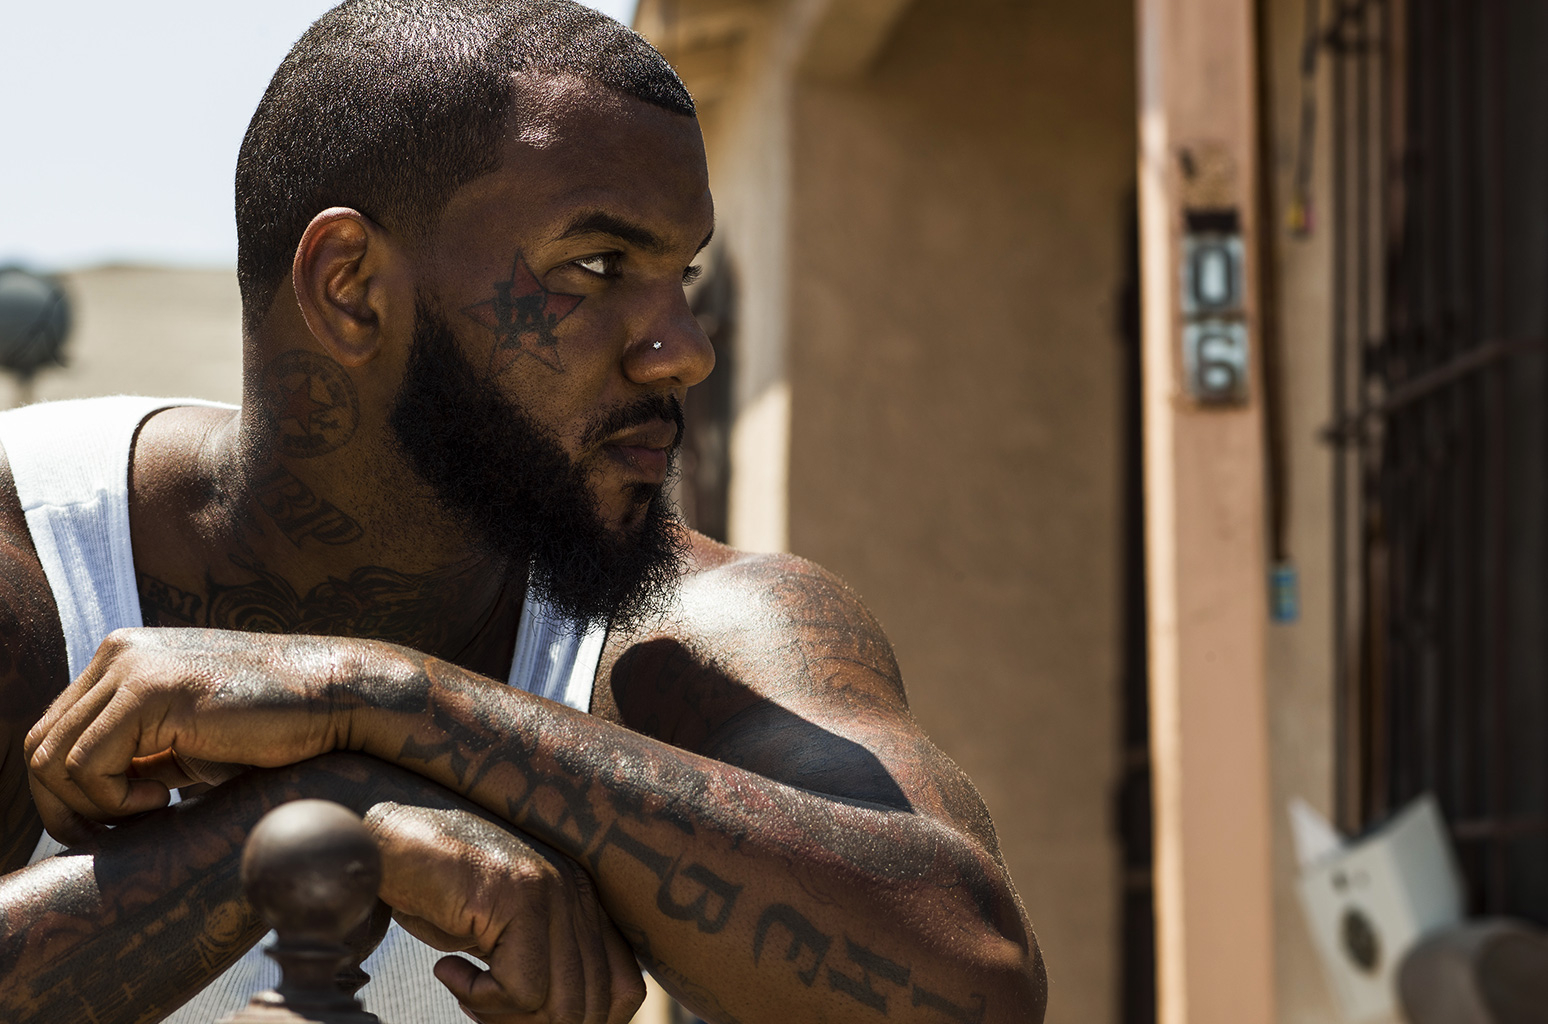 The game рэпер